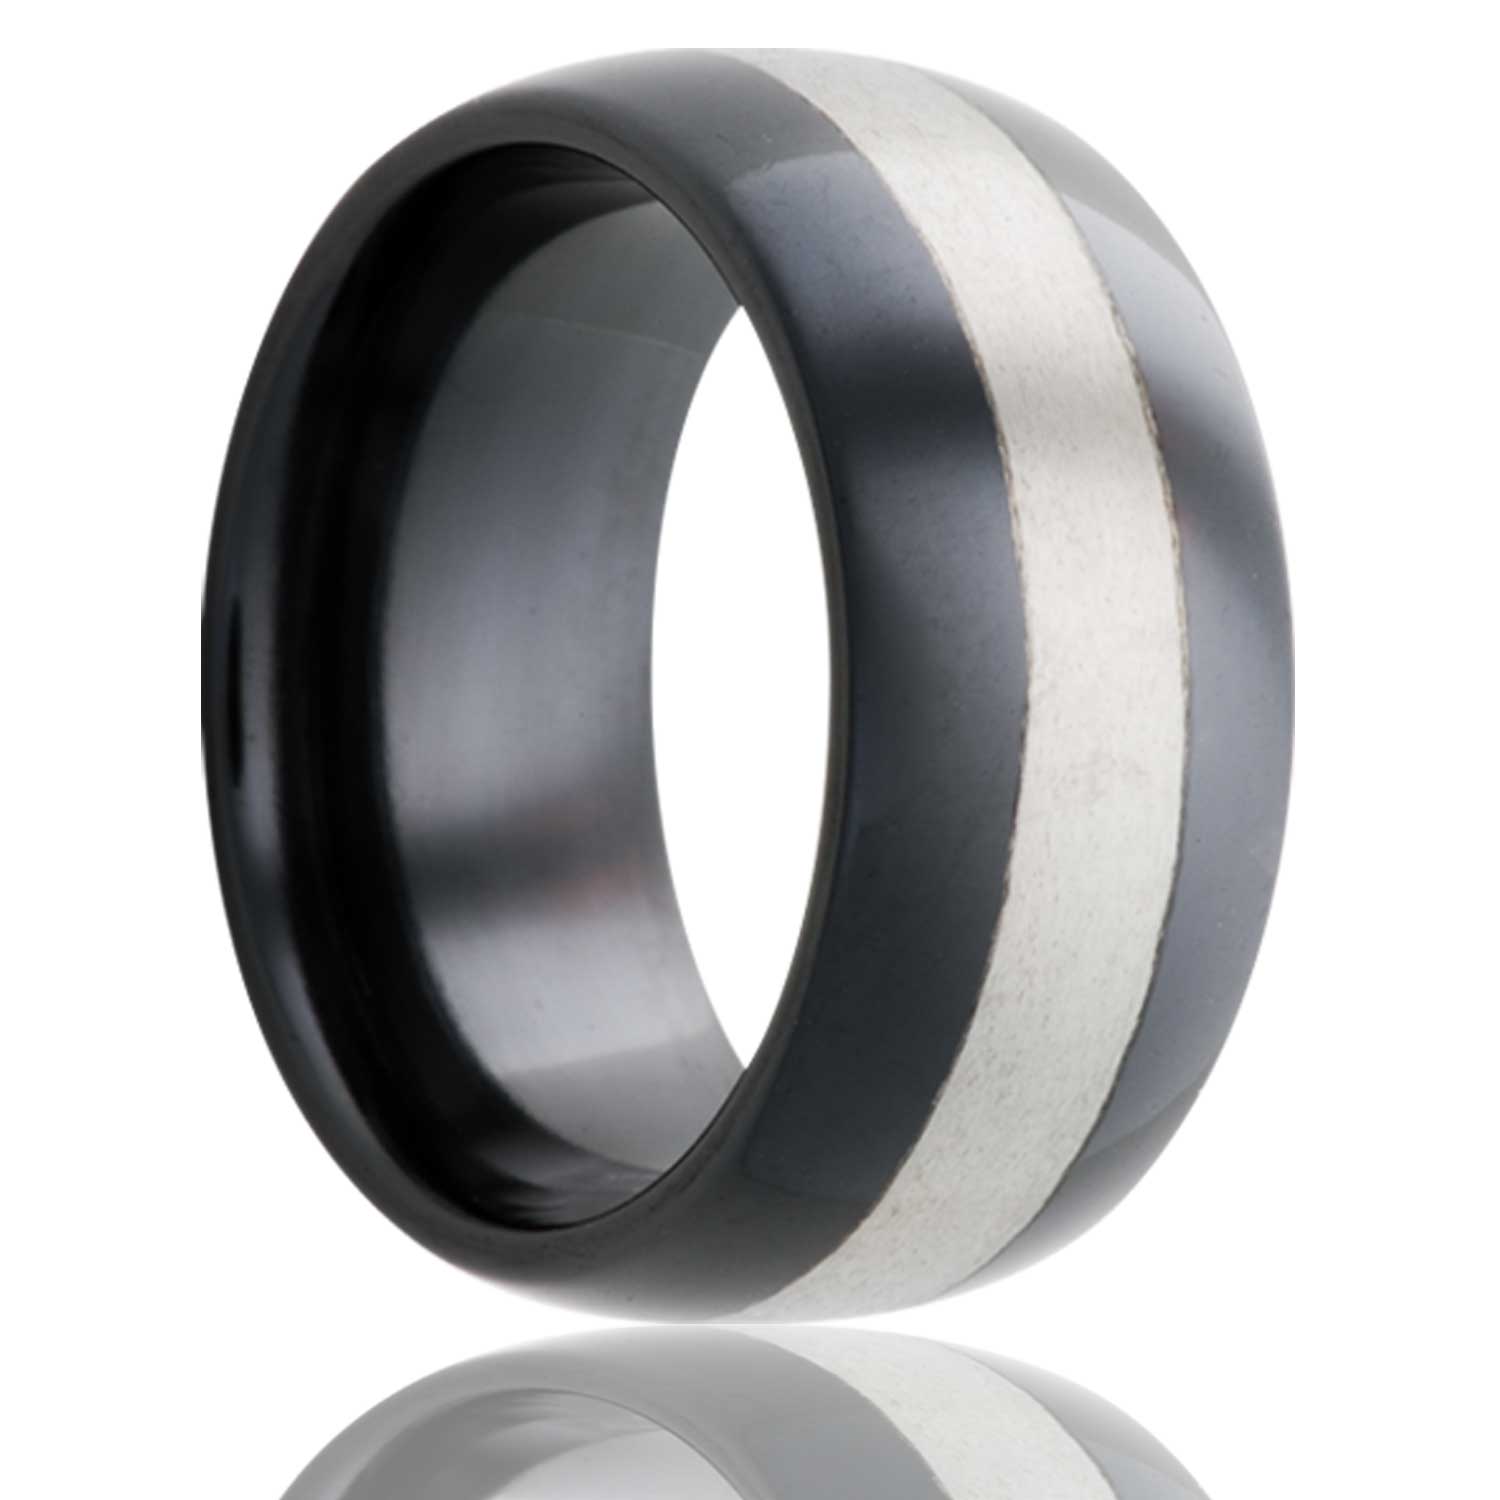 A domed satin finish zirconium wedding band with polished stripe displayed on a neutral white background.